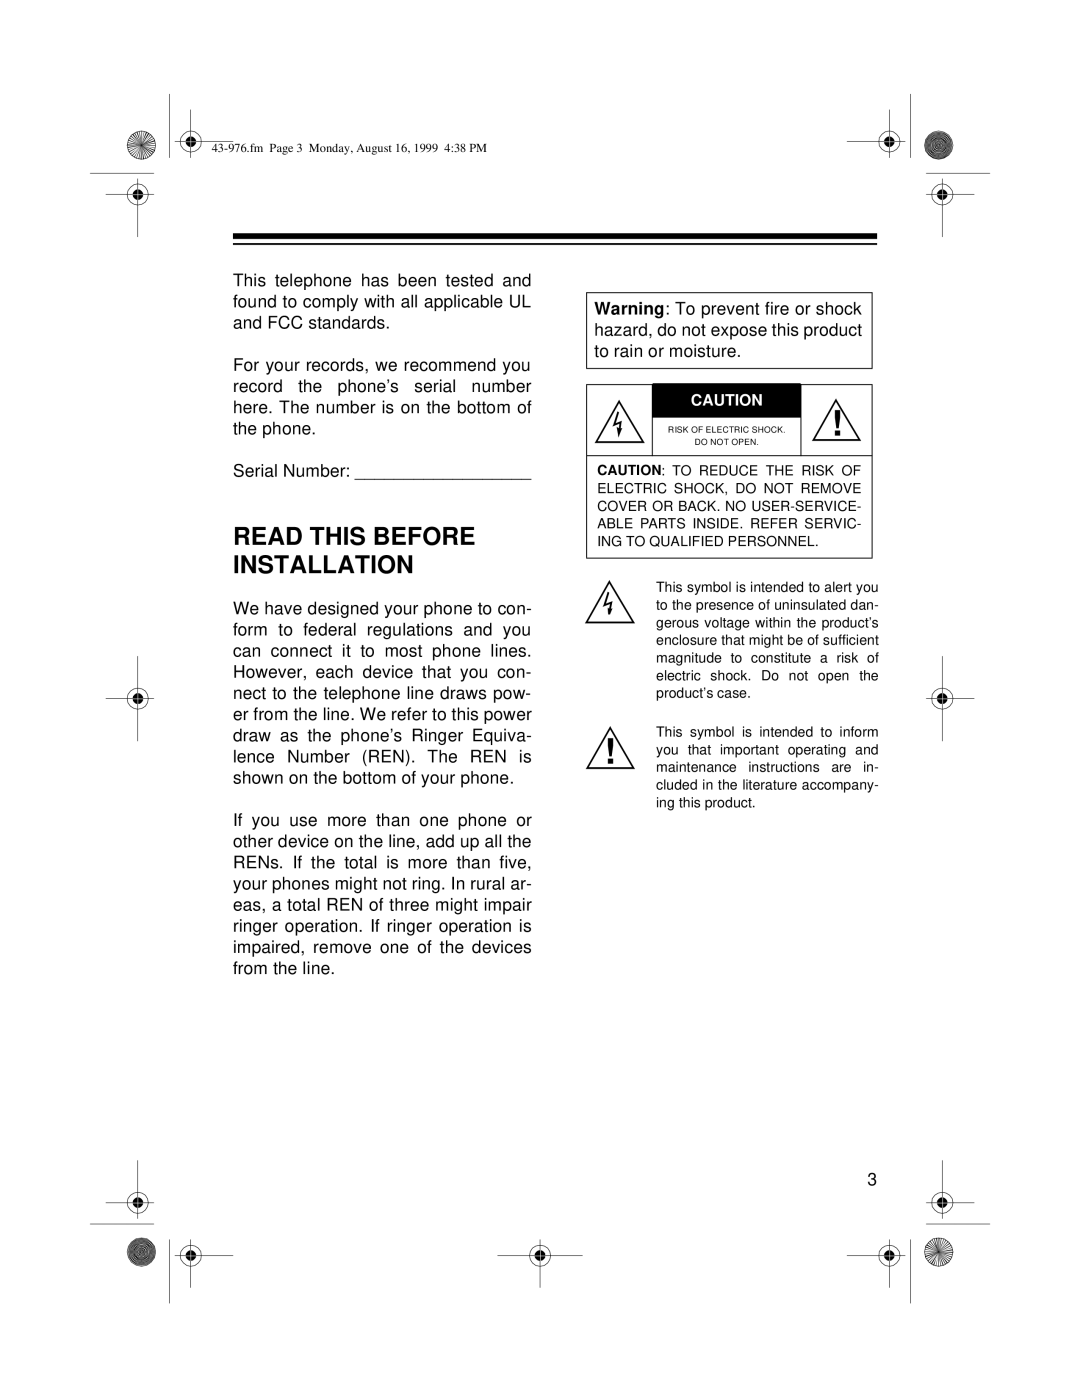 Radio Shack 1500 owner manual Read This Before Installation 